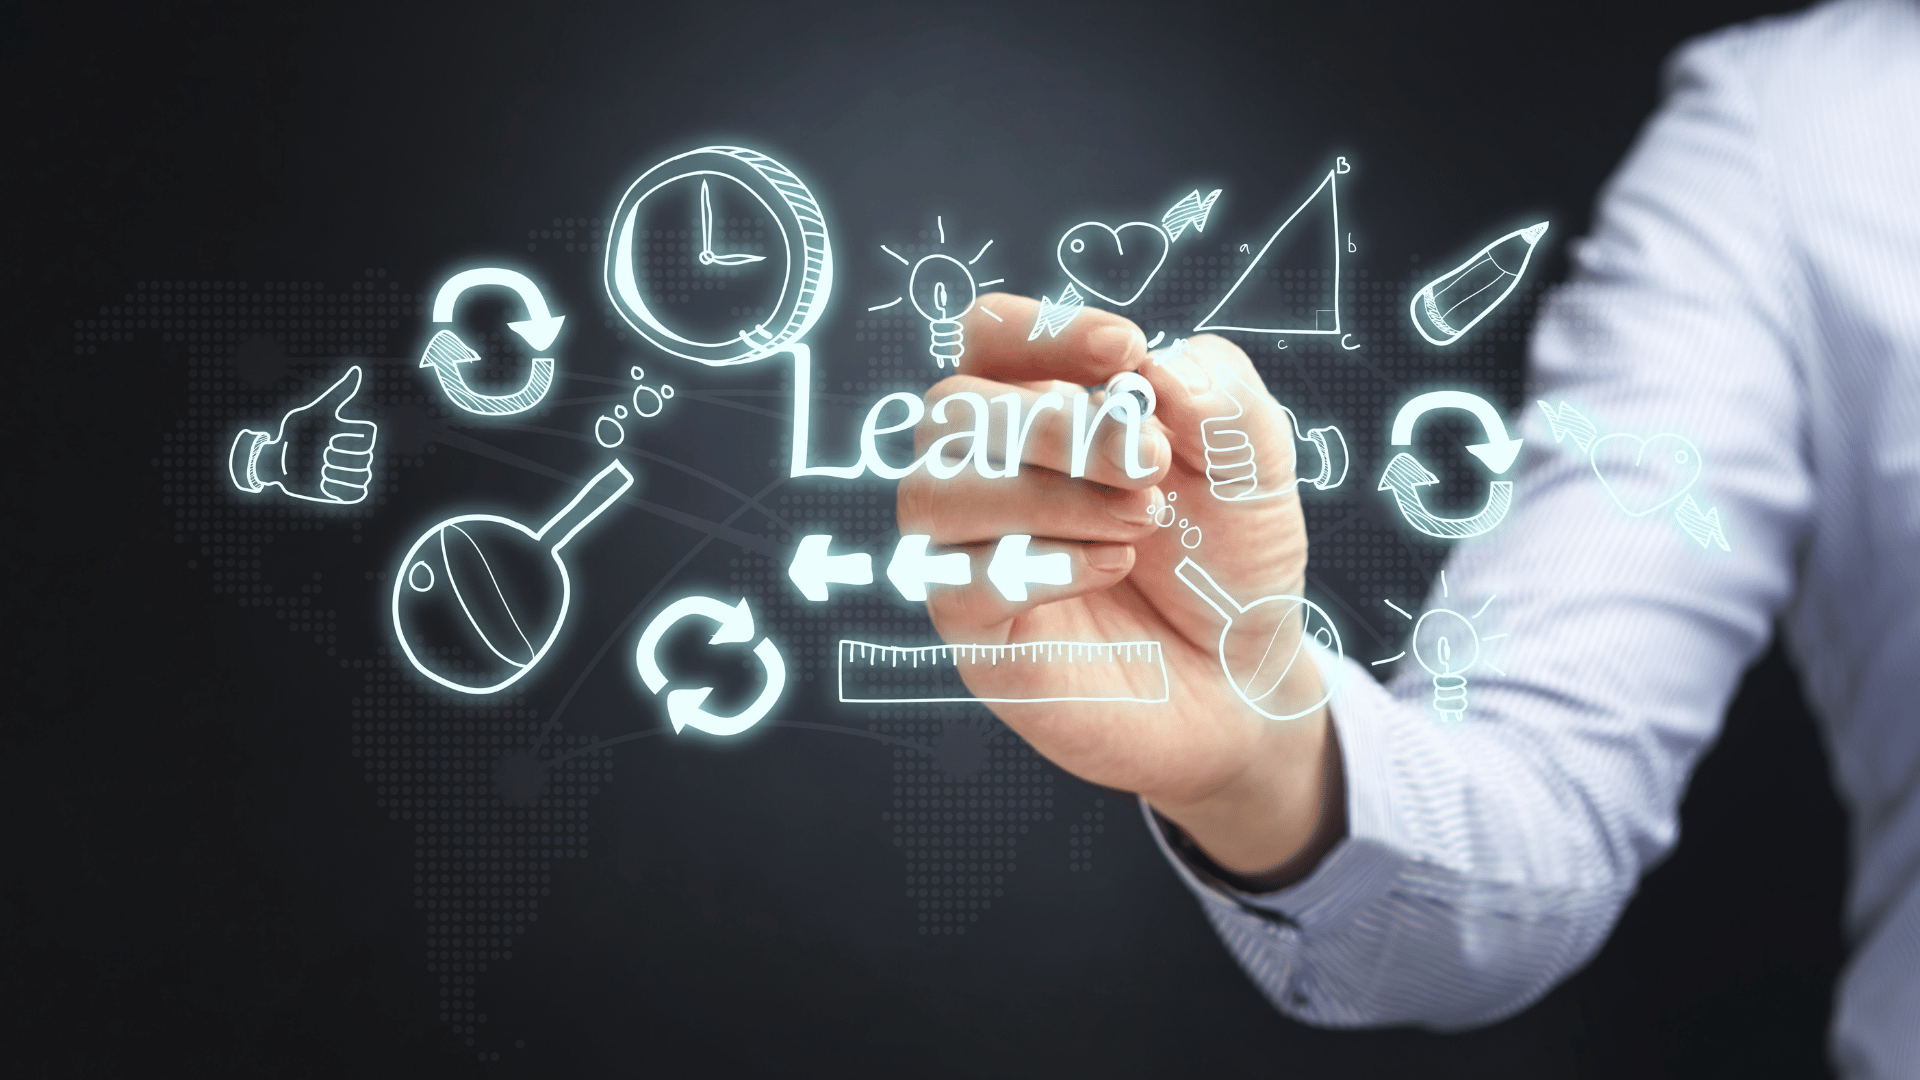 Pluralsight: The Ultimate Learning Tool for Tech Enthusiasts? A Critical Review